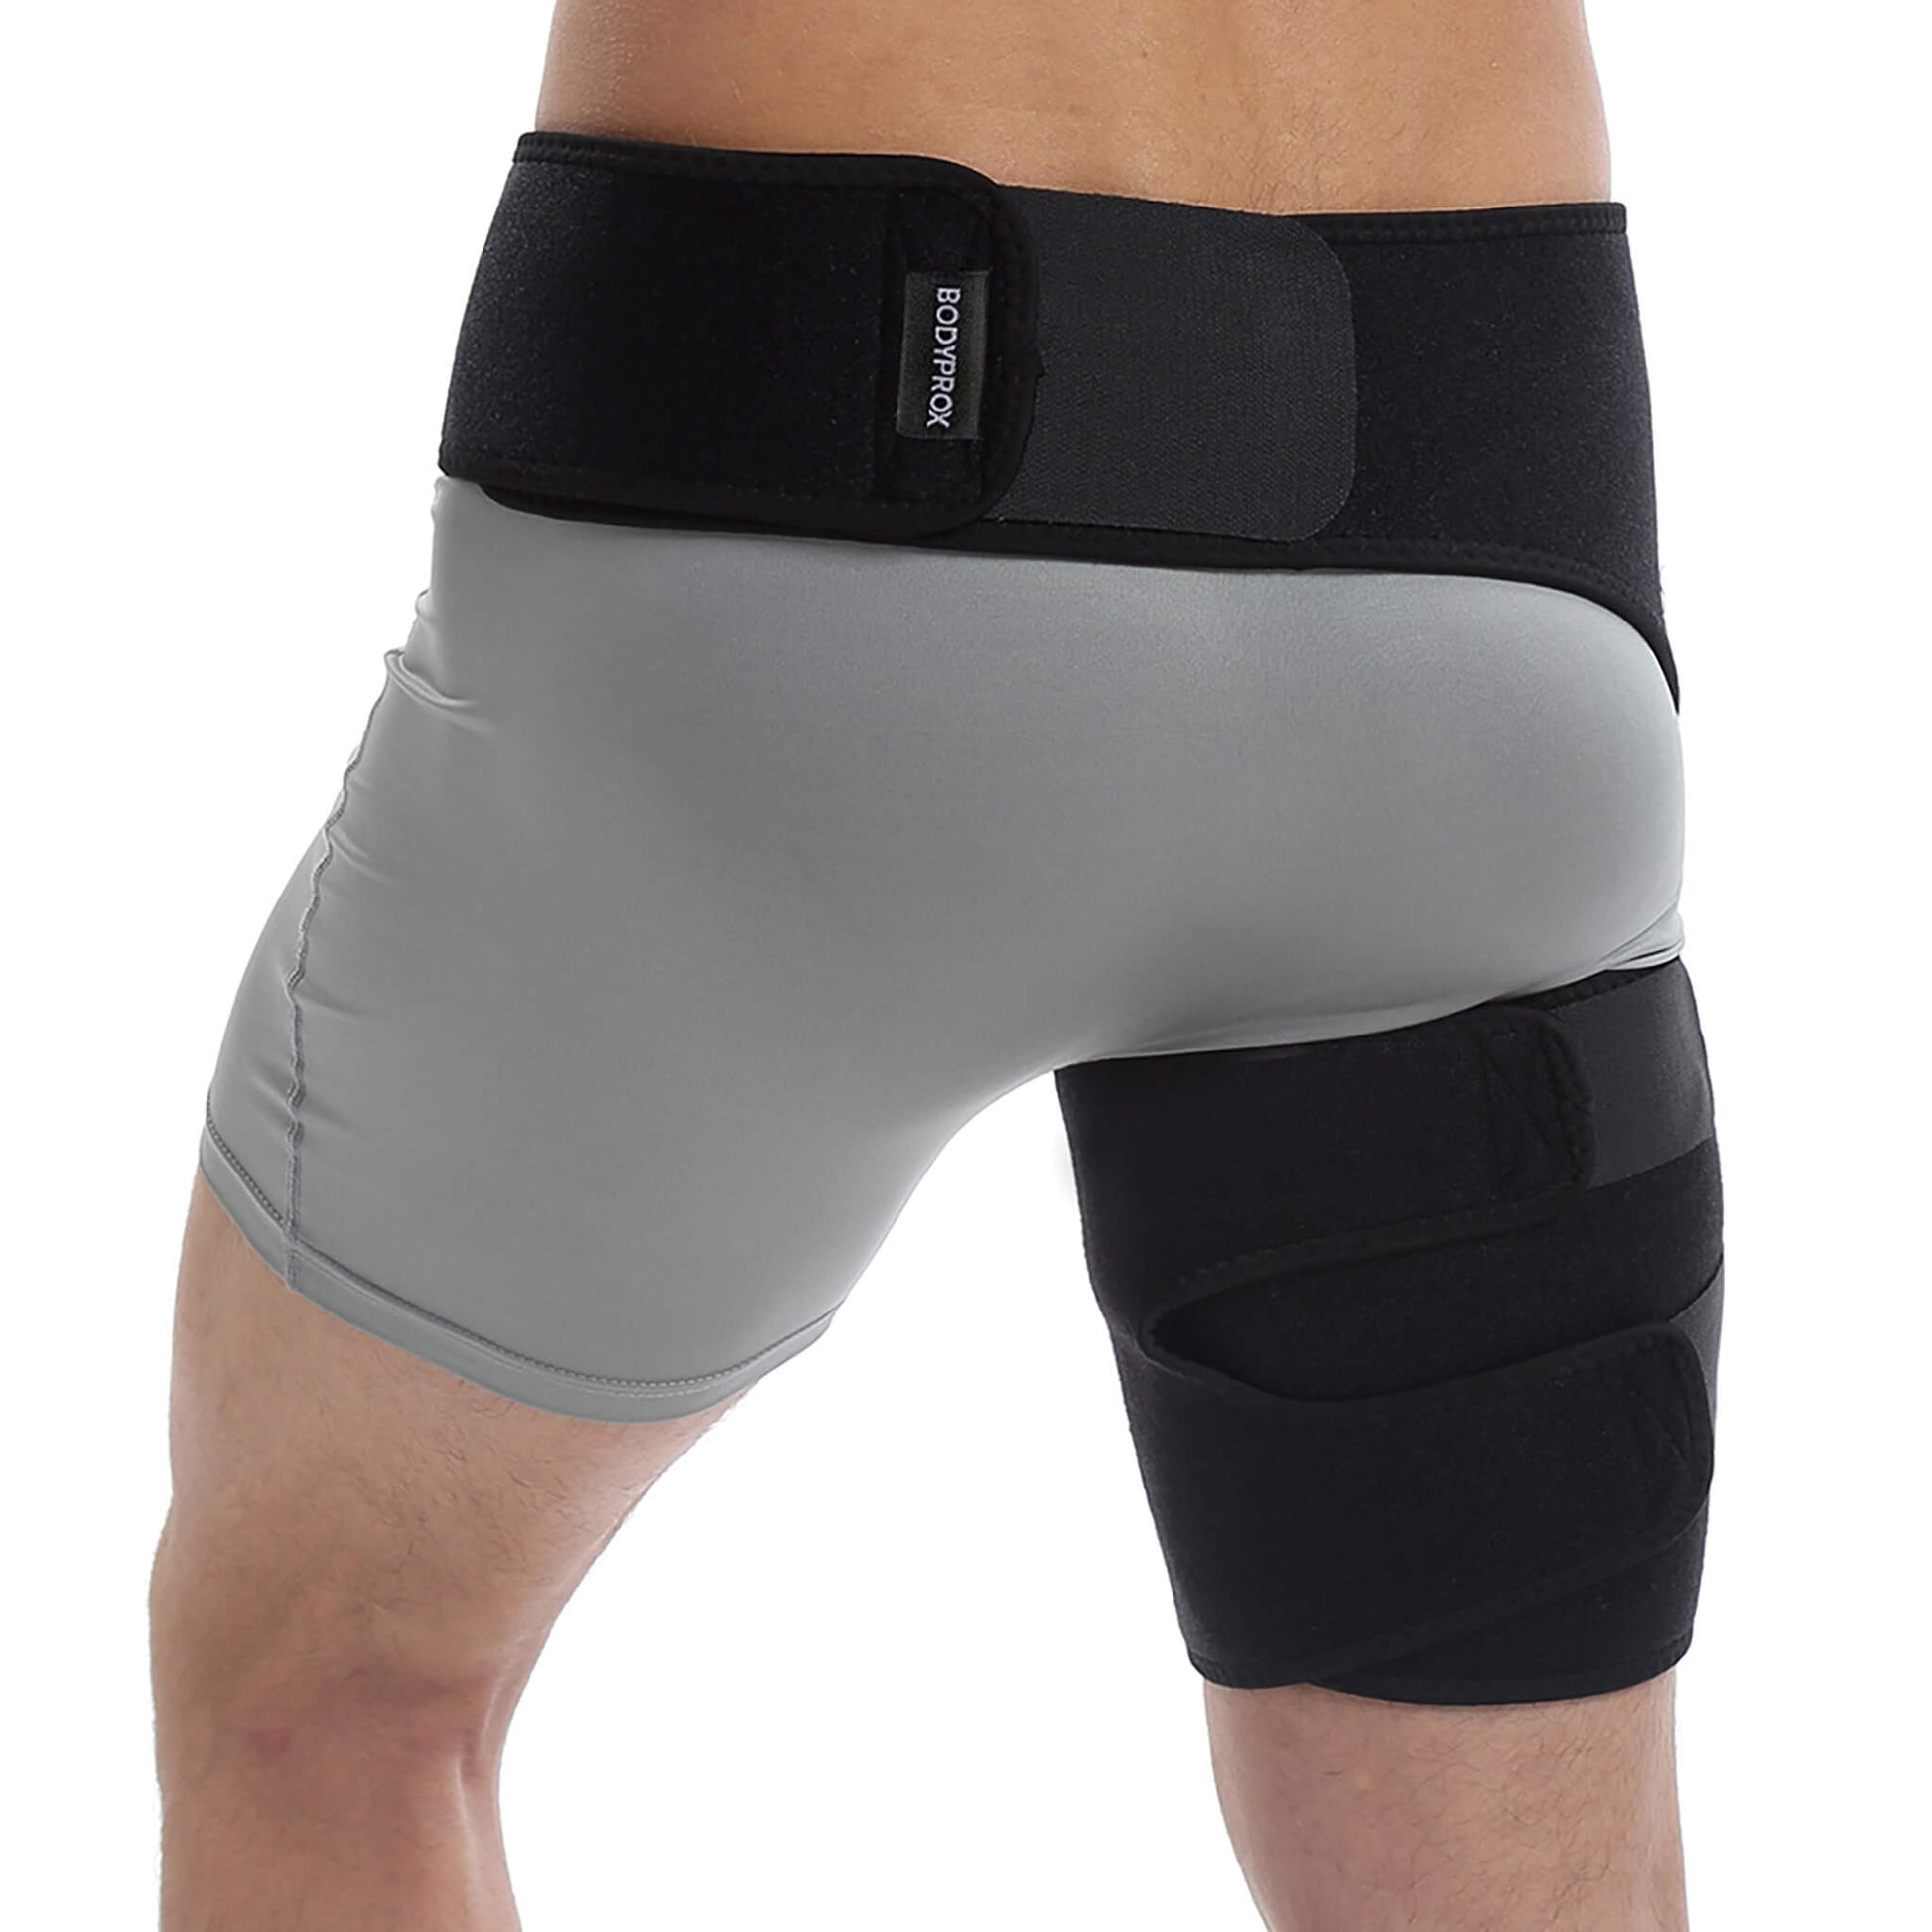 Hip Thigh Support Brace Groin Compression Wrap Fast Pain Relief